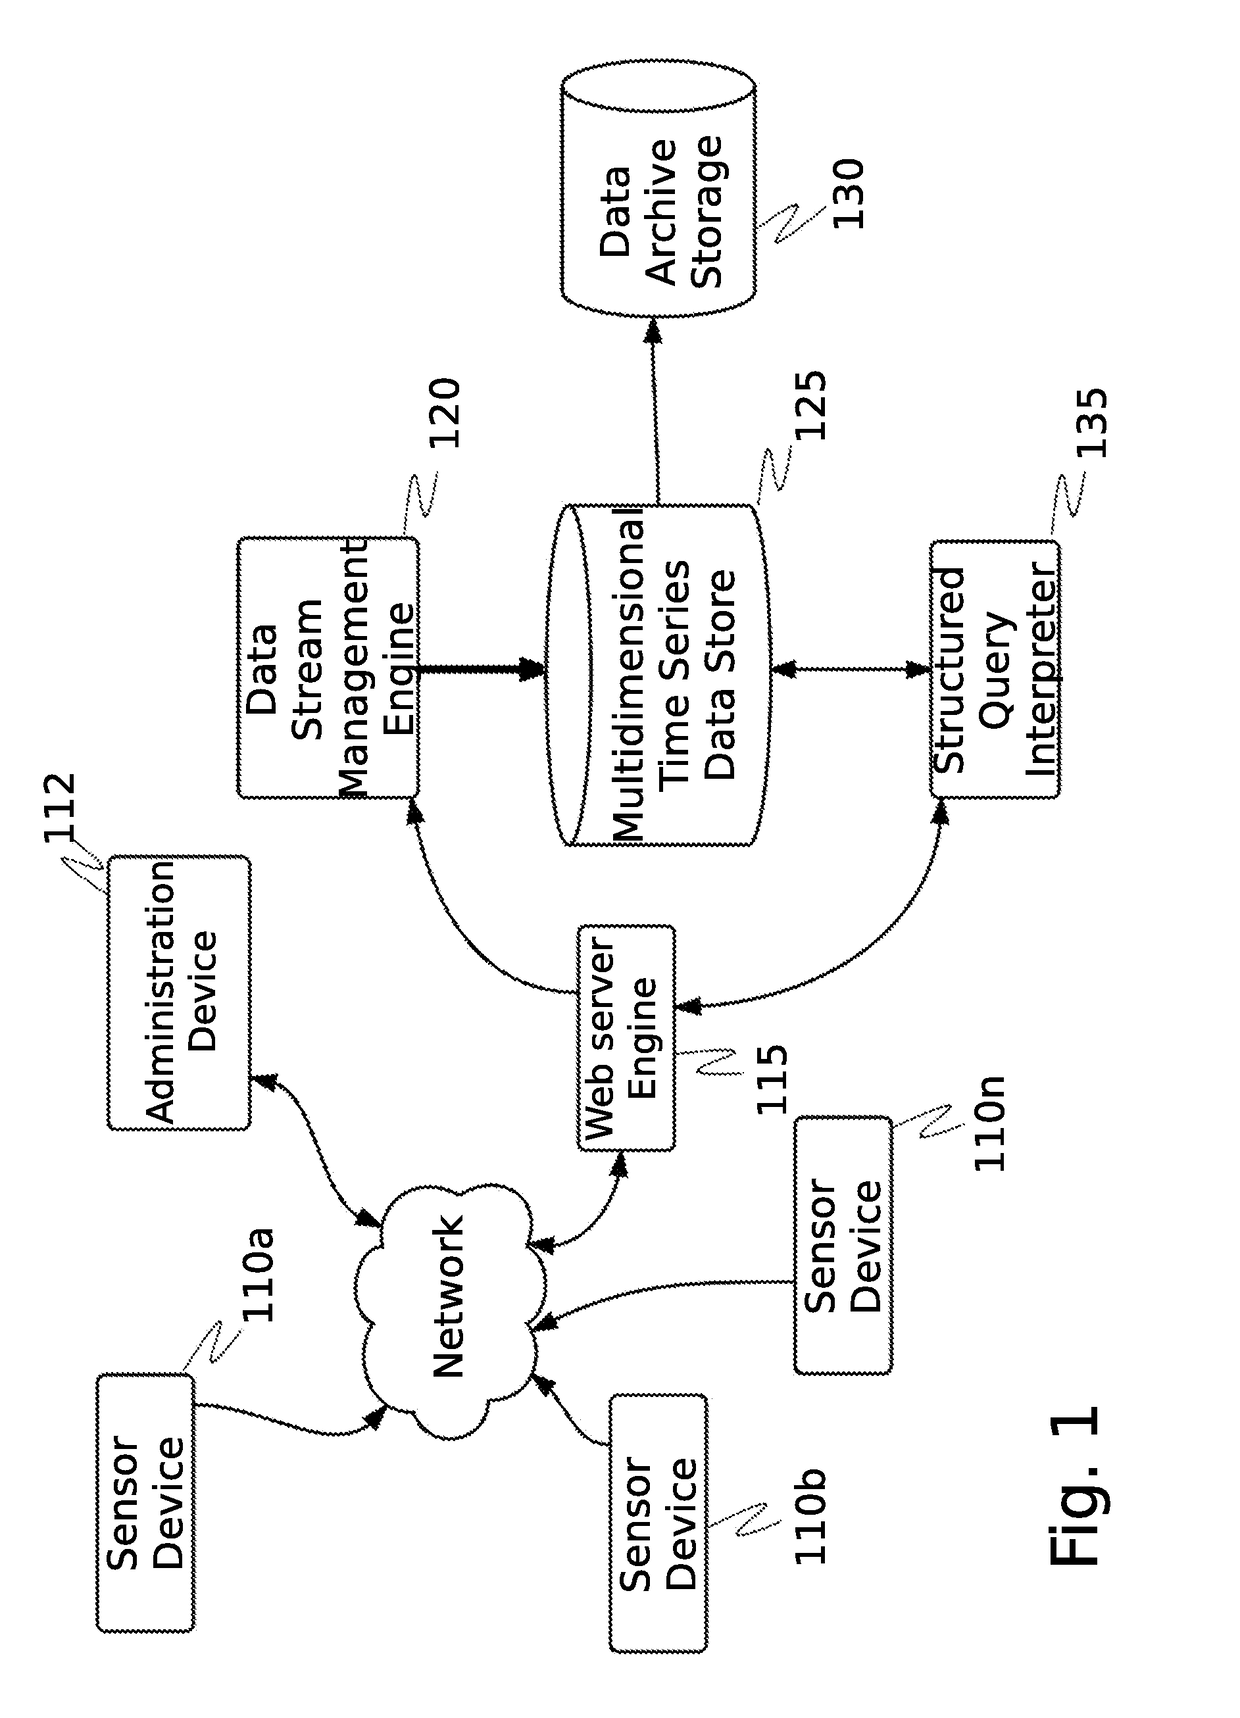 System and method for cybersecurity analysis and score generation for insurance purposes